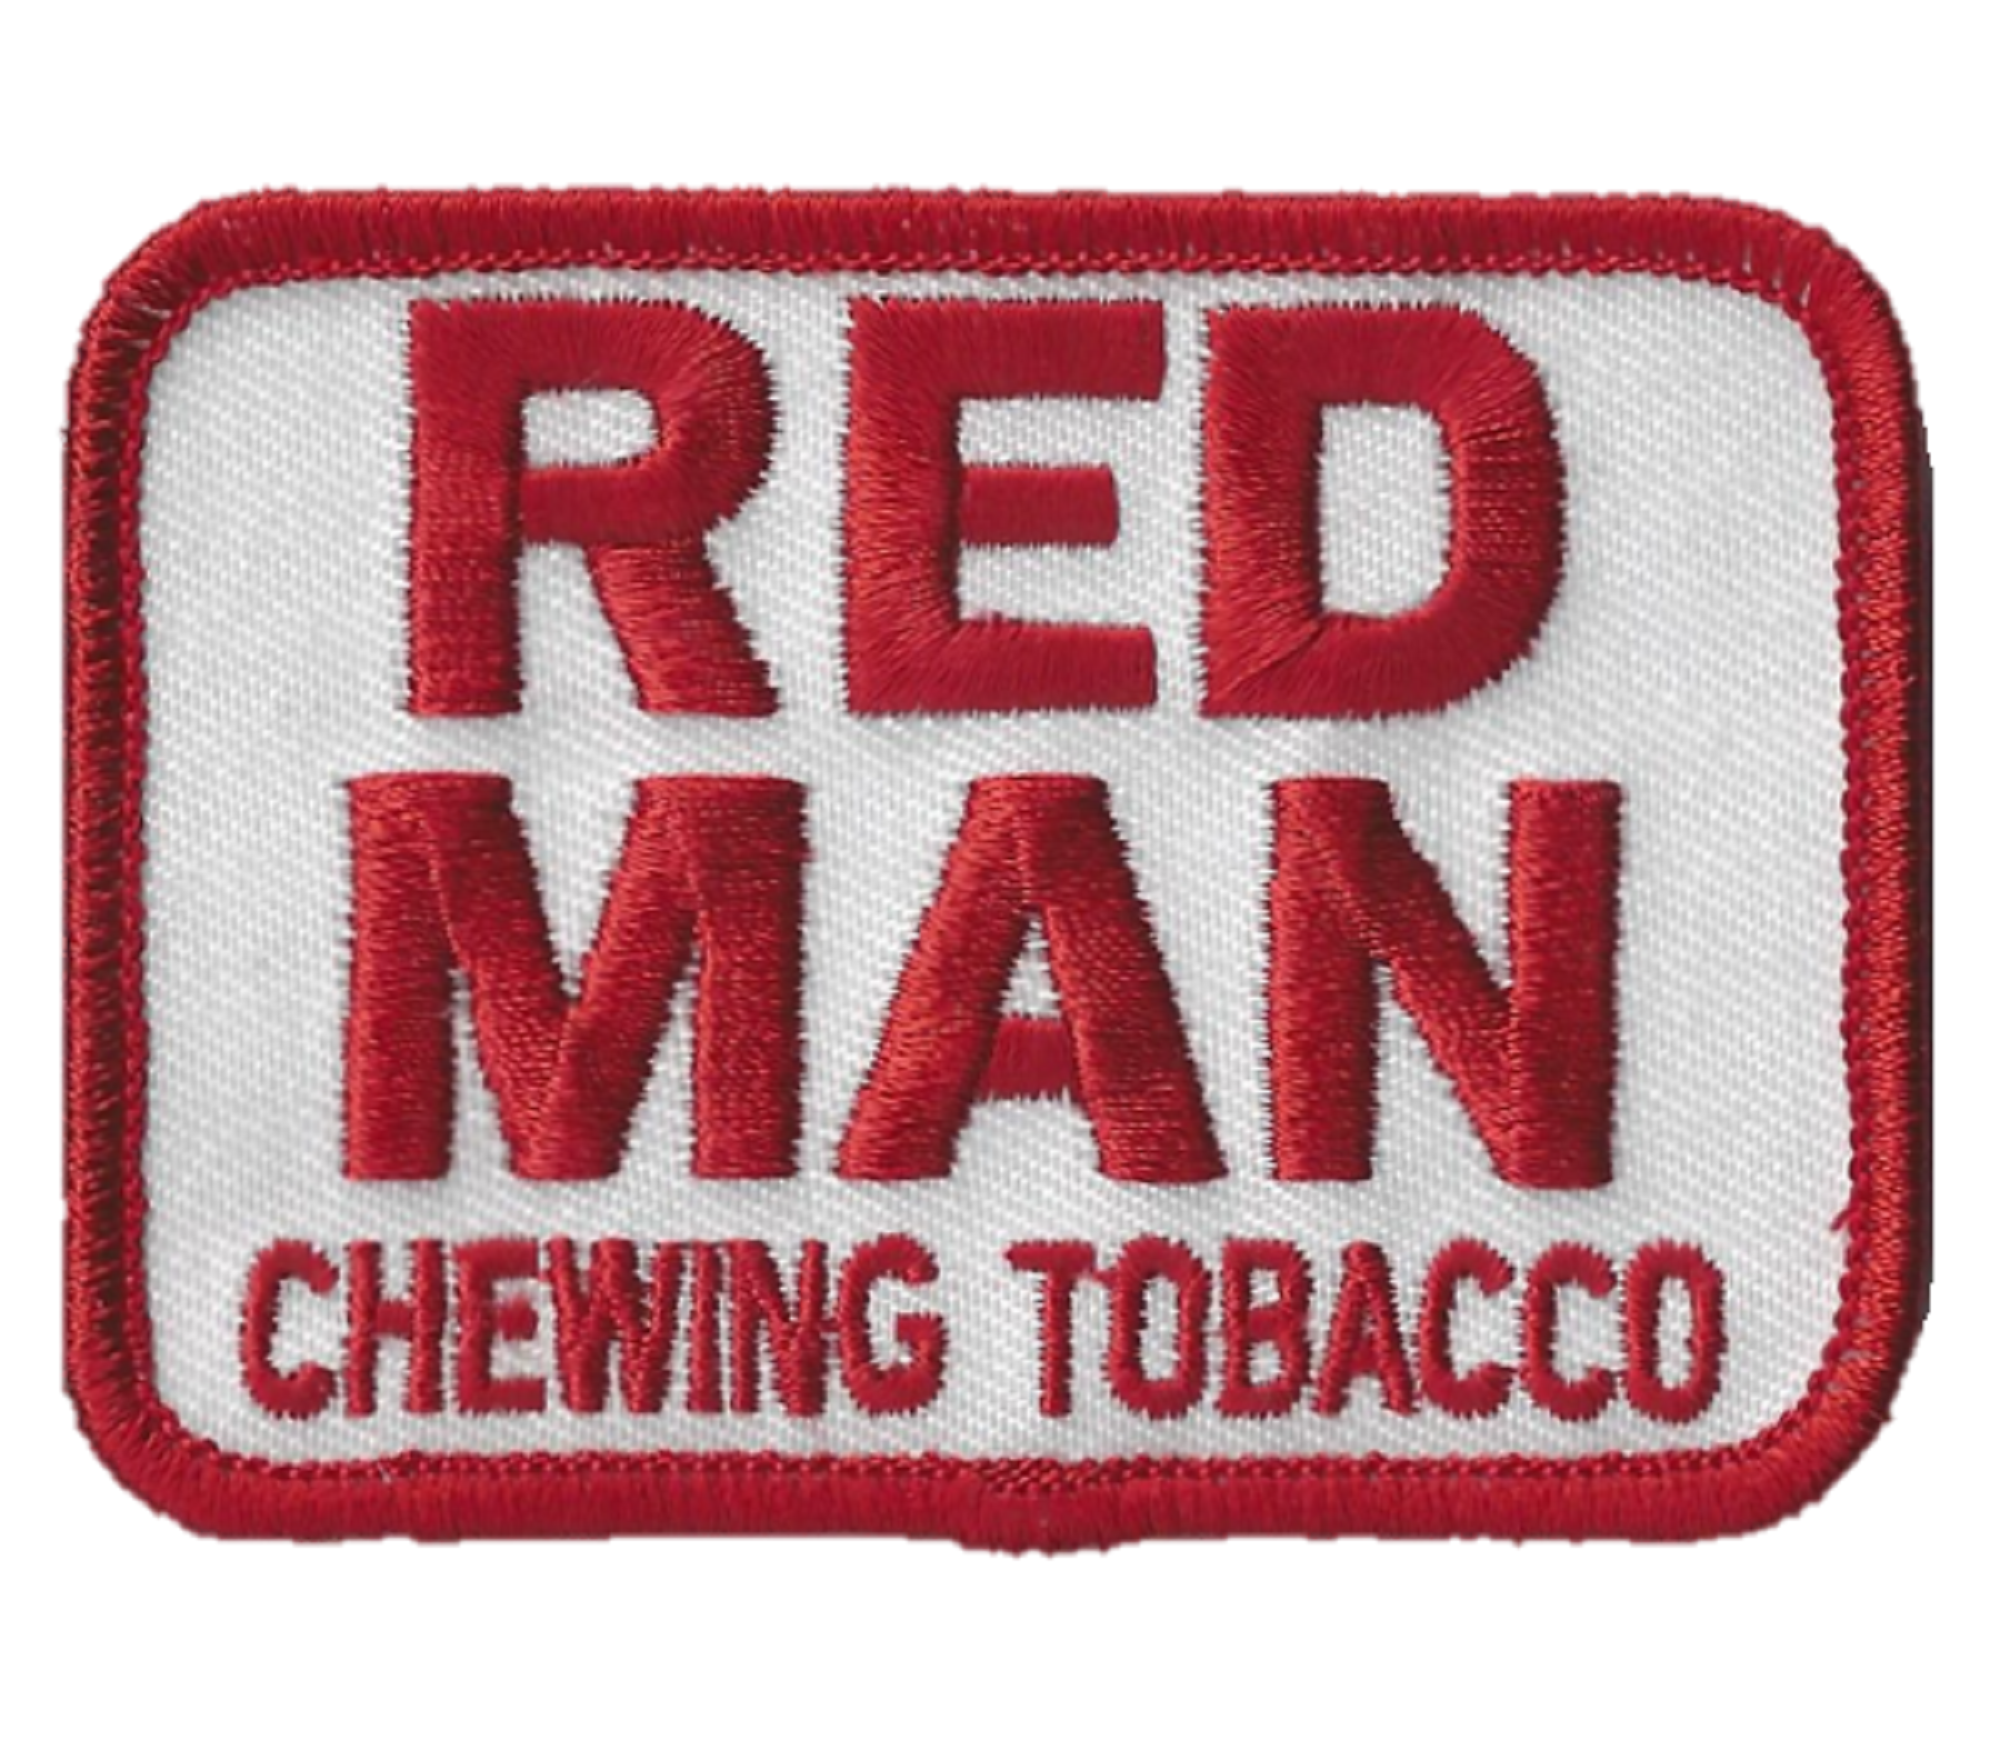 Issued by Red Man Chewing Tobacco